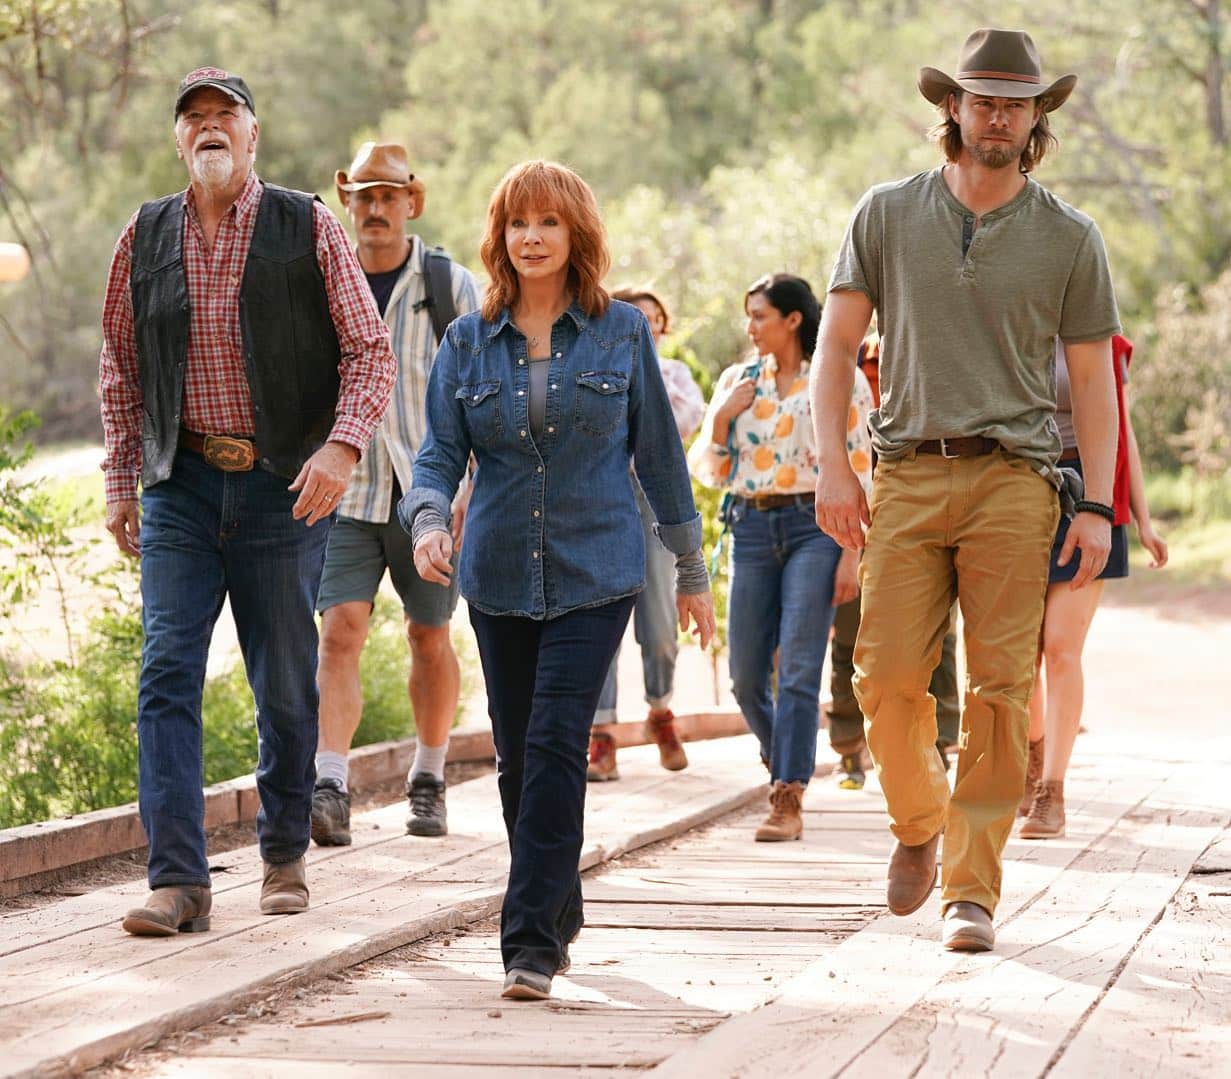 Reba McEntire and her boyfriend Rex Linn in character as Sunny and Buck Barnes in season three of the ABC drama series, Big Sky